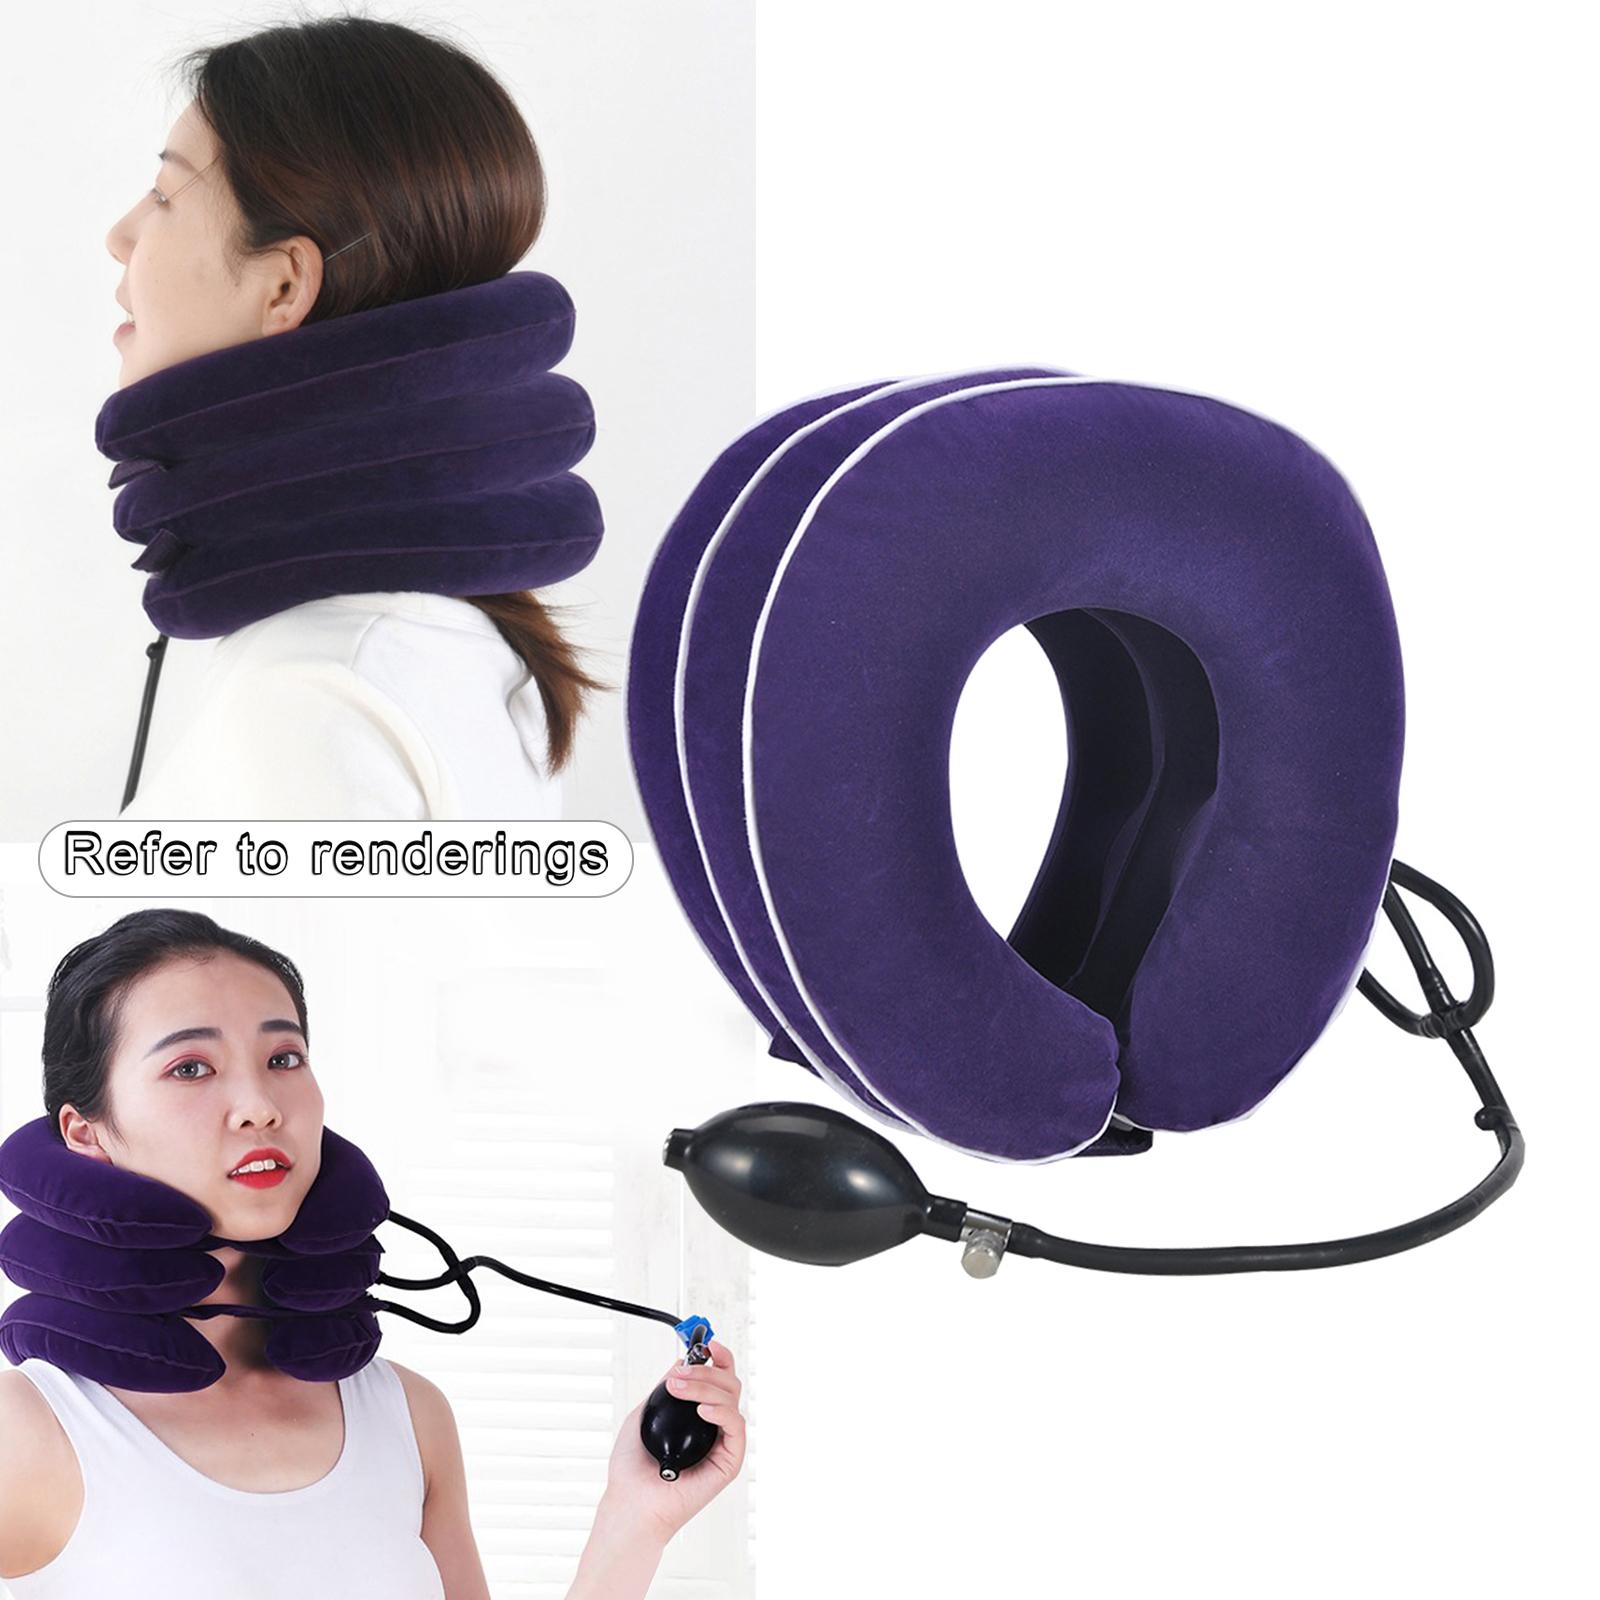 Cervical Neck Traction Device Brace Home Traction Spine Alignment Purple